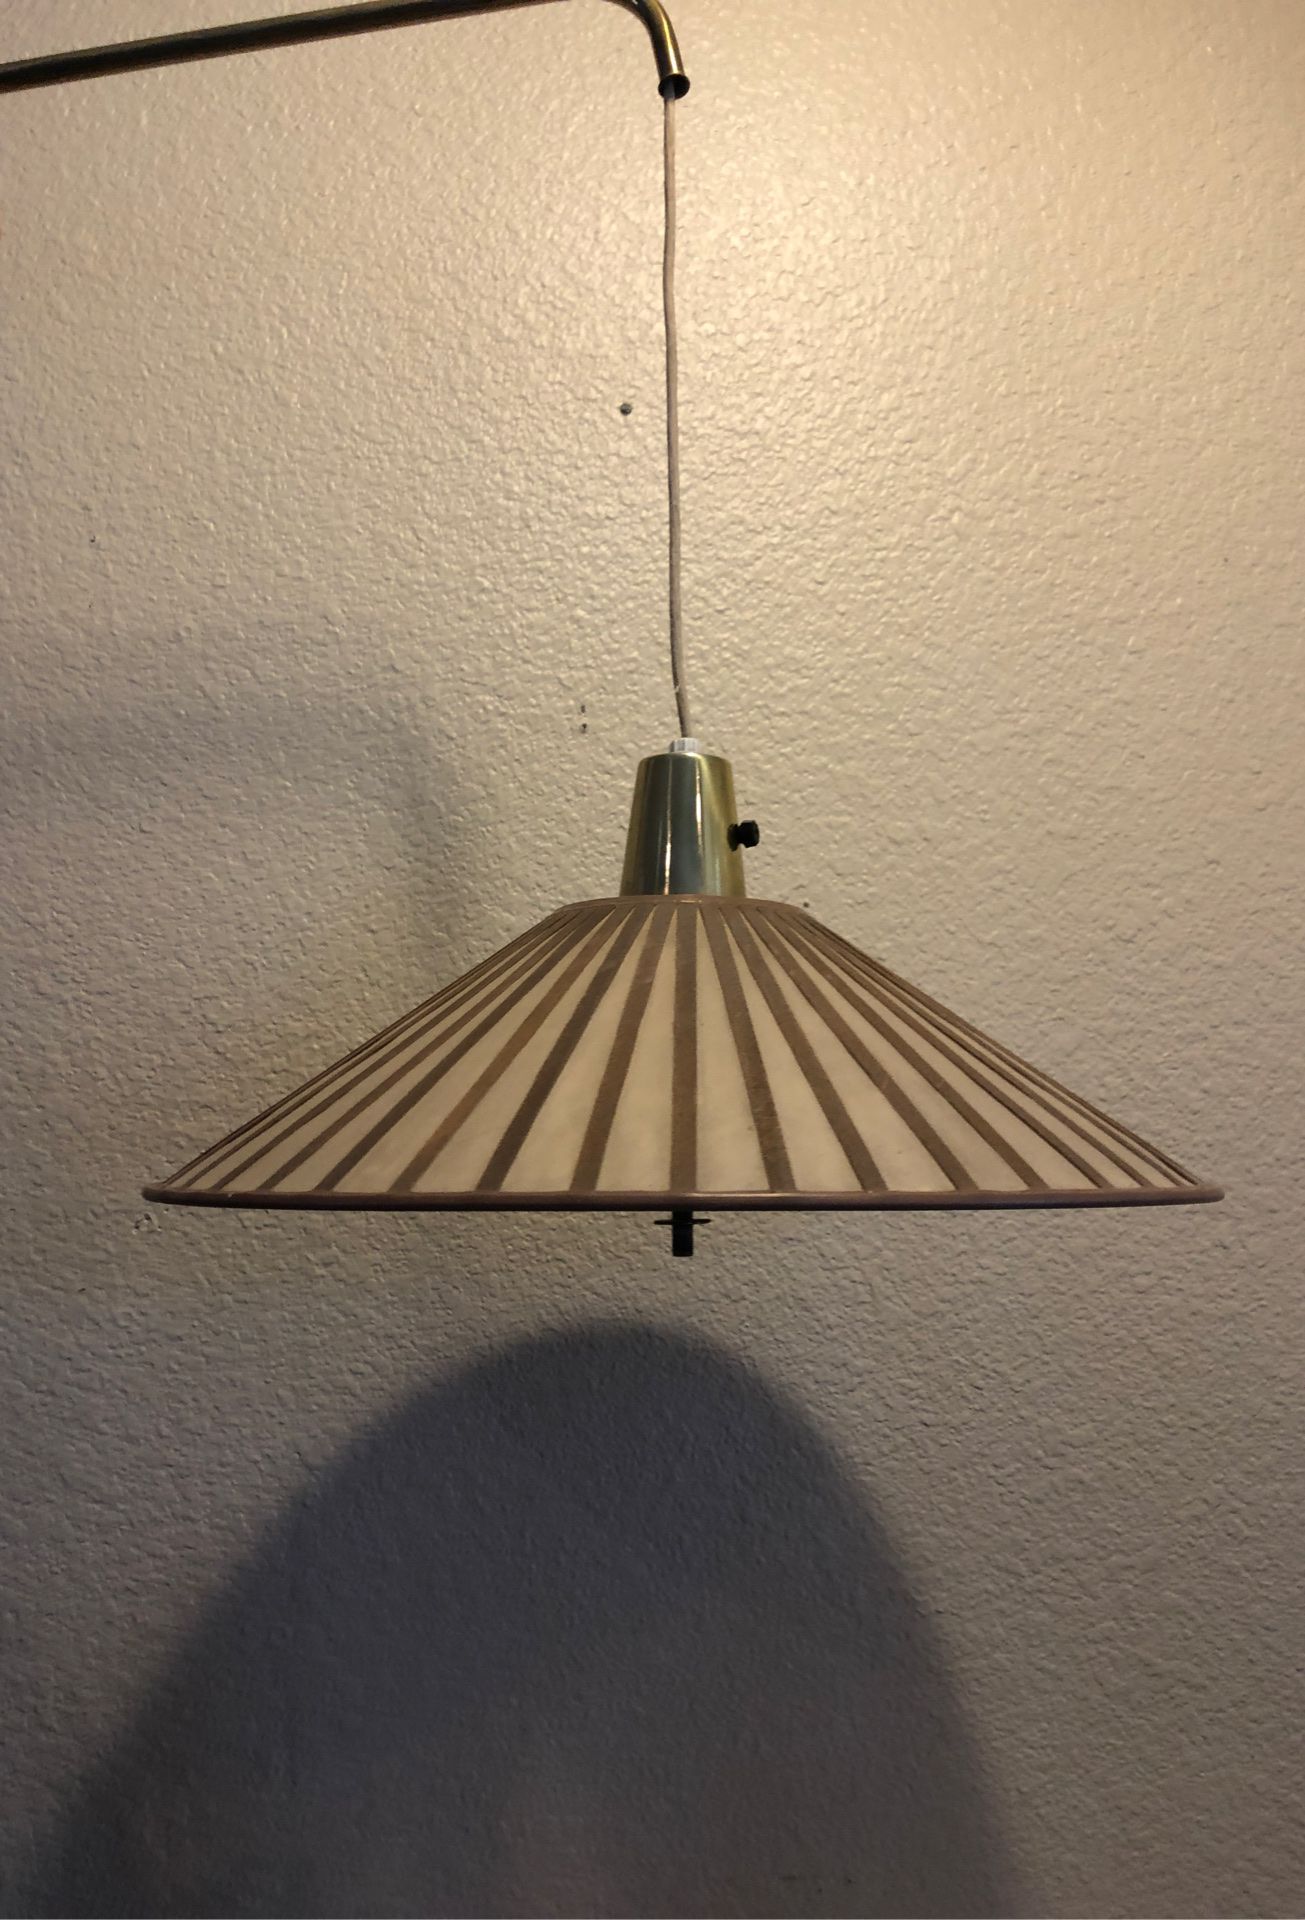 Very rare Florence Knoll style hanging light fixture